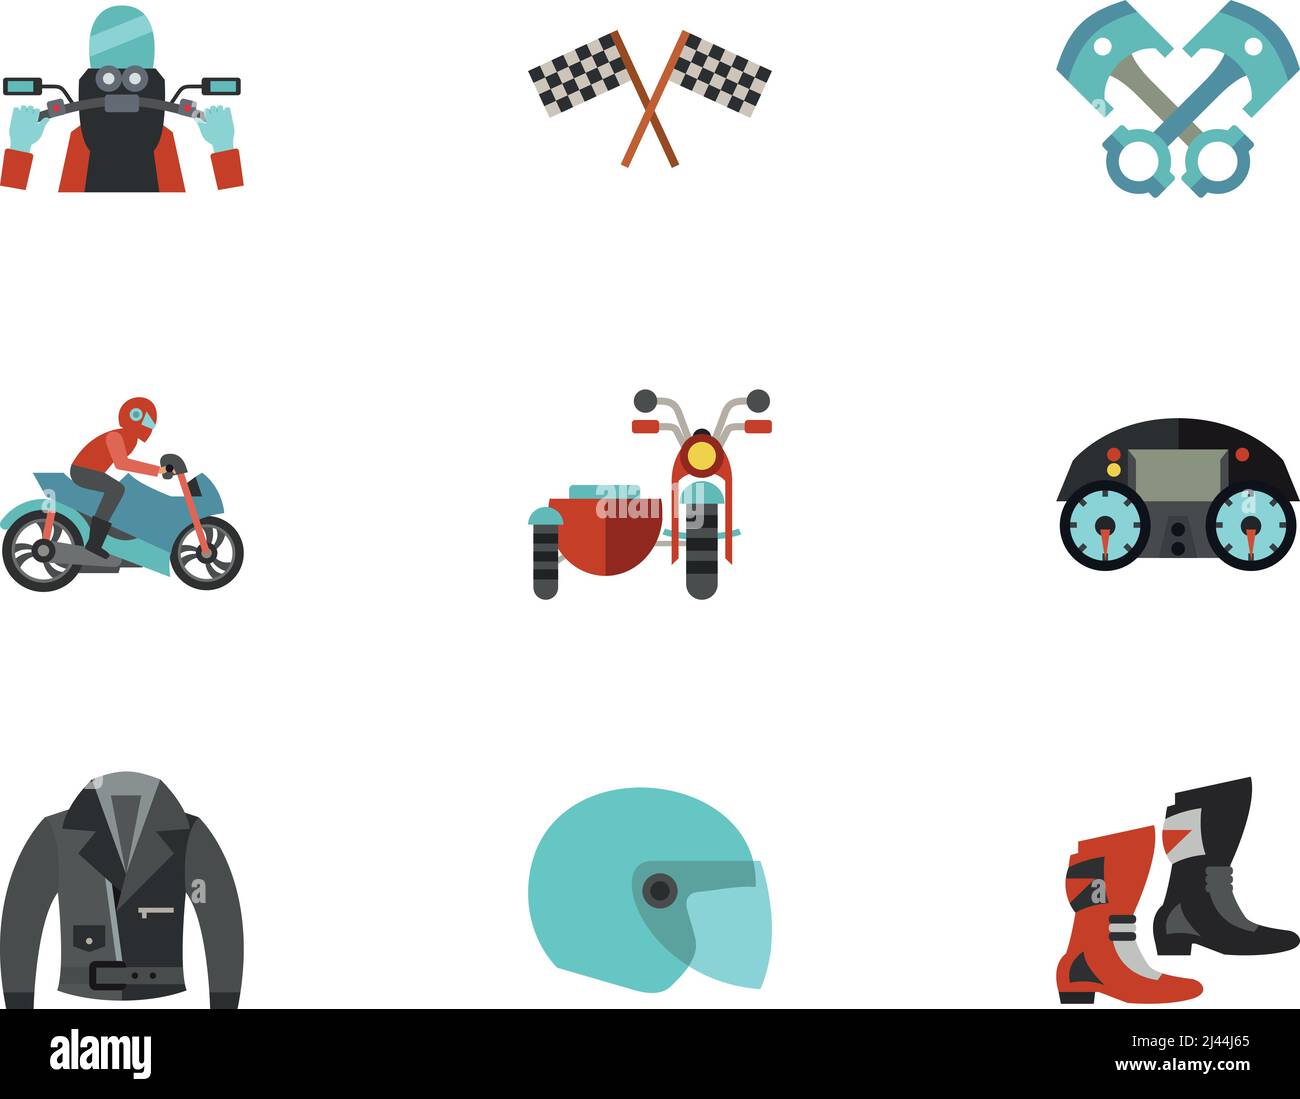 Motorcycling Icon Set. Biker Riding Motorcycling Racing Flag Piston Engine Motorcyclist On Bike Motorcycle With Sidecar Motorcycle Dashboard Leather J Stock Vector